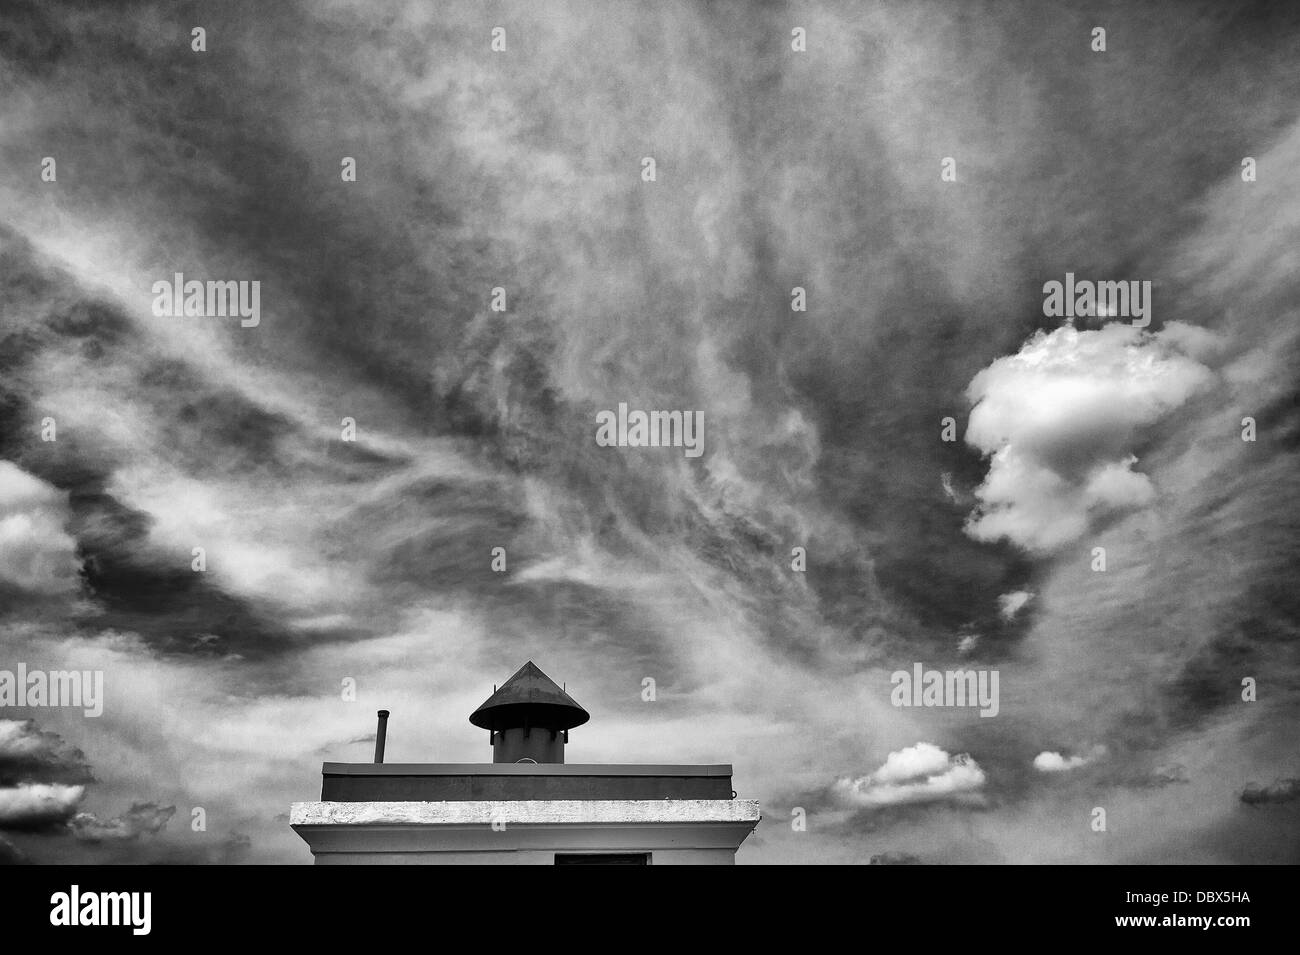 Dramatic clouds and sky over chimney in black and white Stock Photo